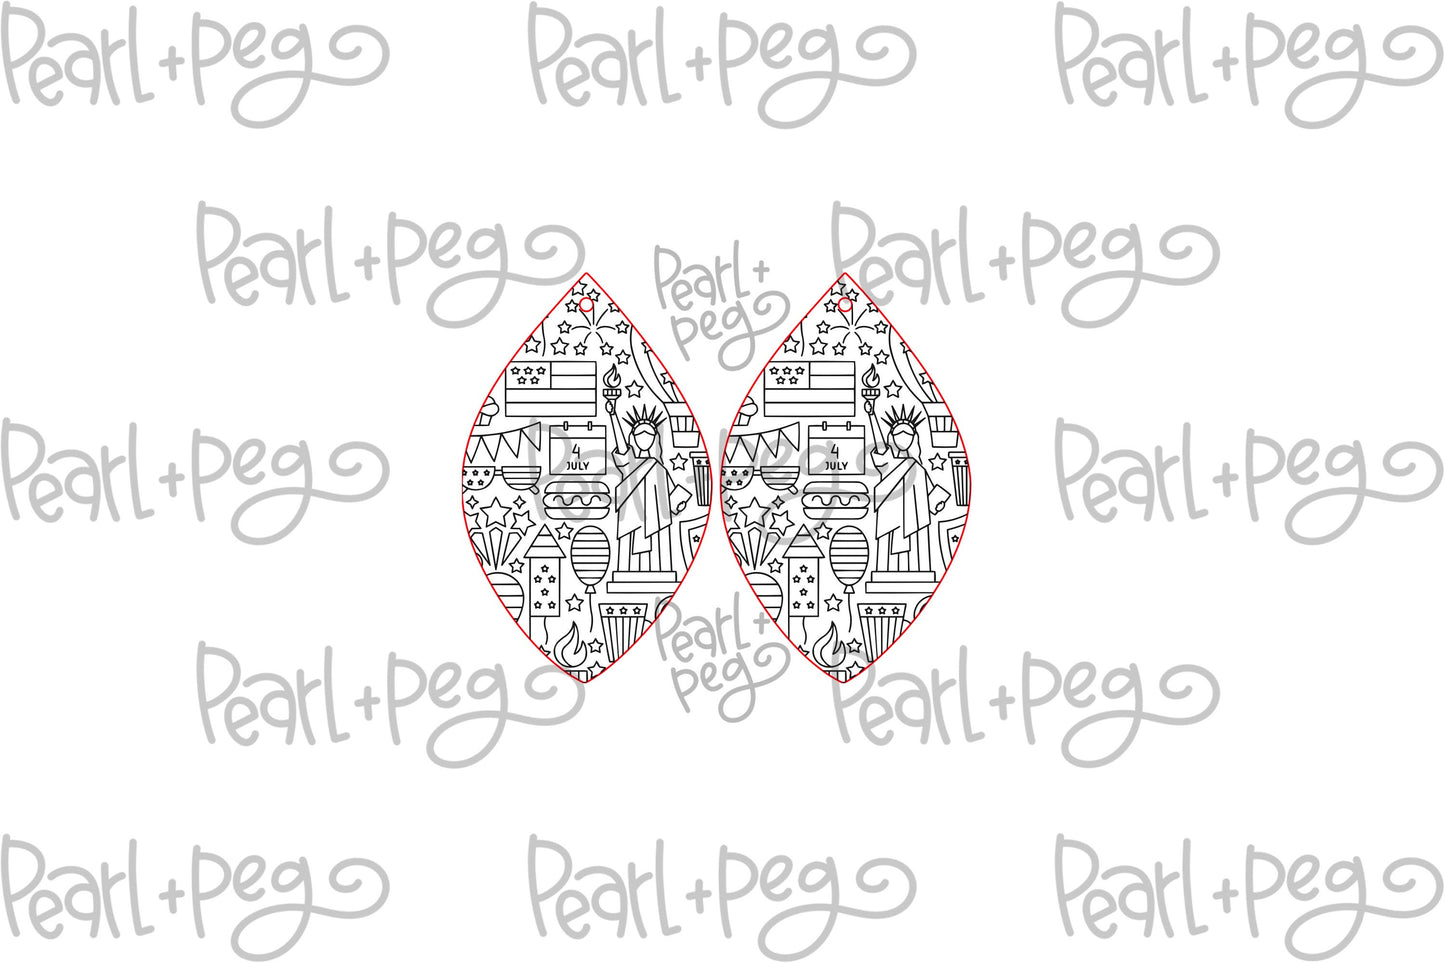 4th Of July Icon Drop Laser Engraved Earrings Digital Download